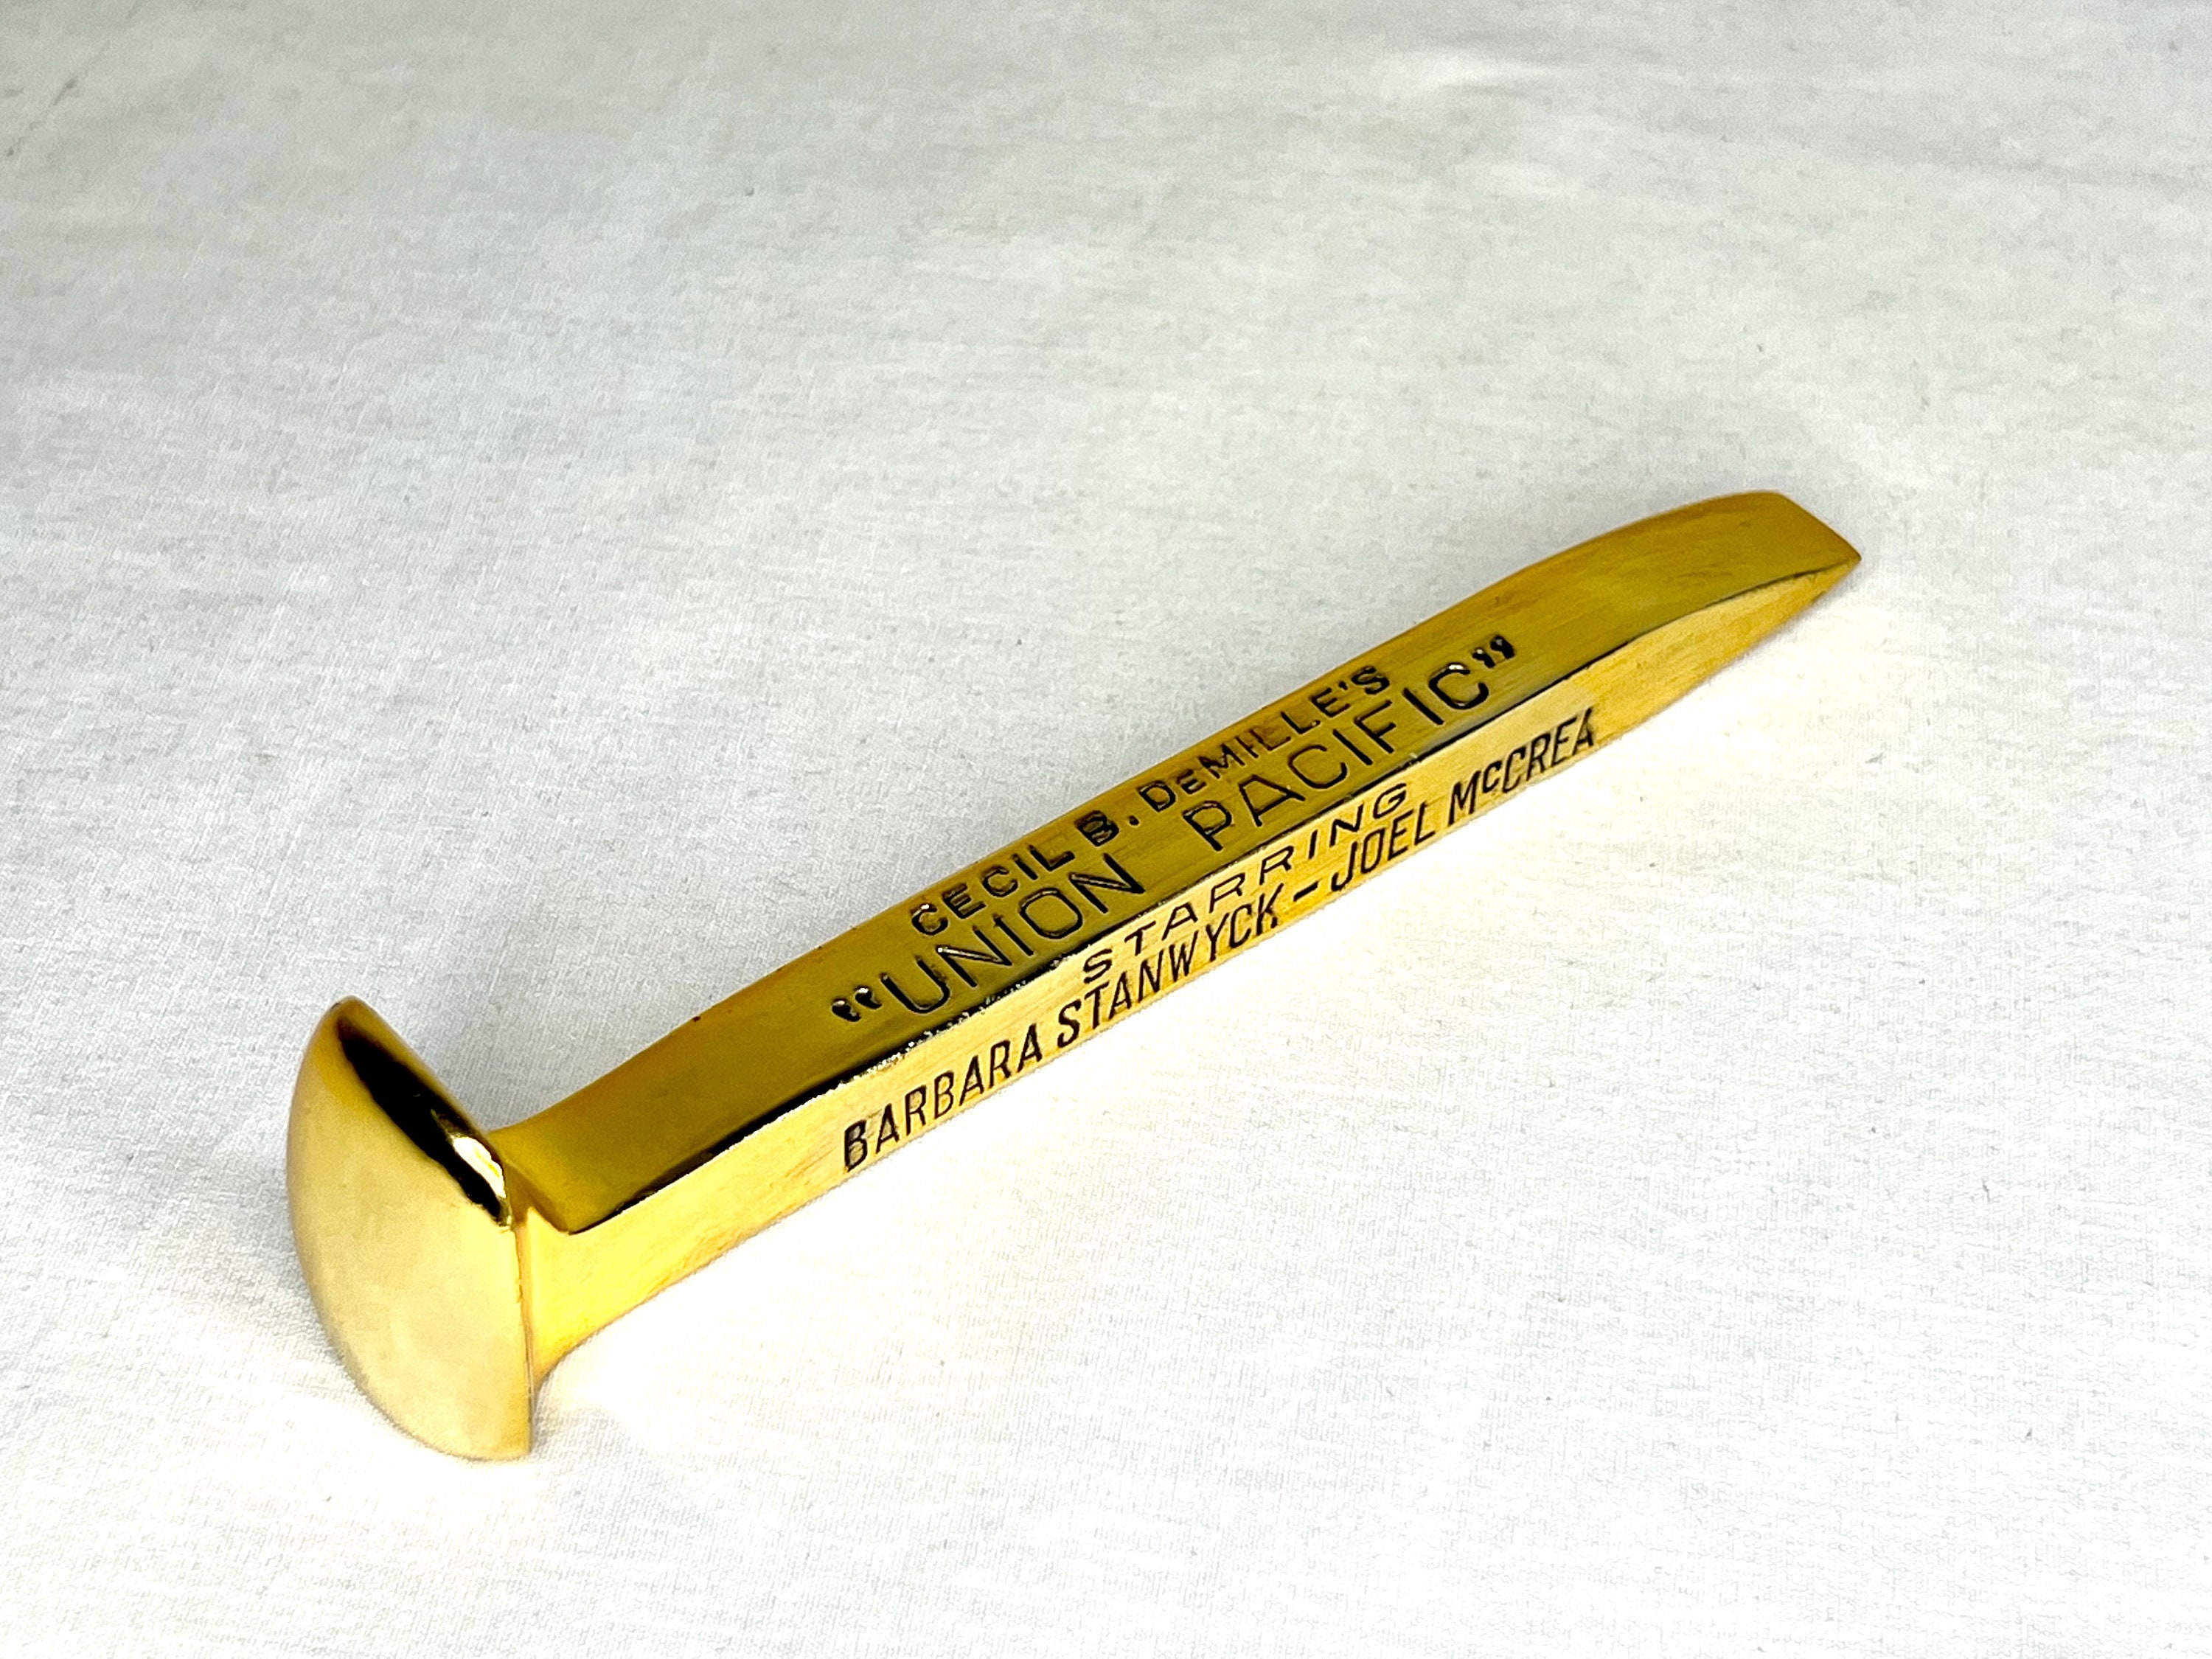 Union Pacific Transcontinental Railroad Gold Spike, Real Relic Replica, Gold  Plated, Solid Metal, Signed, Numbered, Limited Edition 